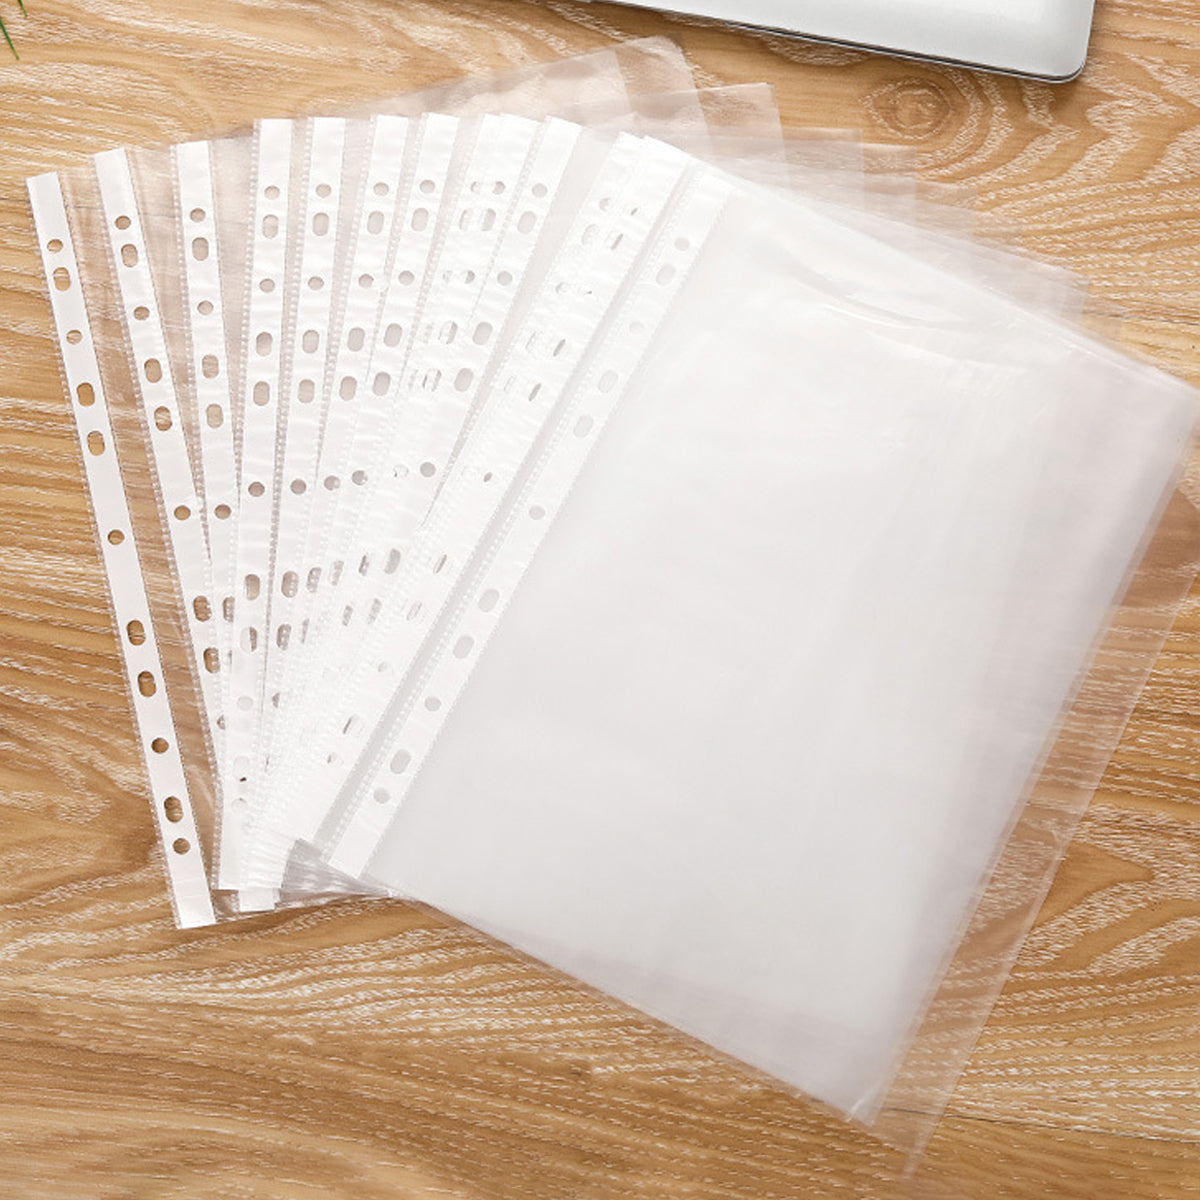 100 Pack Clear Sheet Protectors 9.4 x 12Inch,Plastic Page Protectors Sheet Reinforced 11-Hole， Page Protectors for 3 Ring Binder, Clear Protector, Letter Size, Top Loading, Acid Free